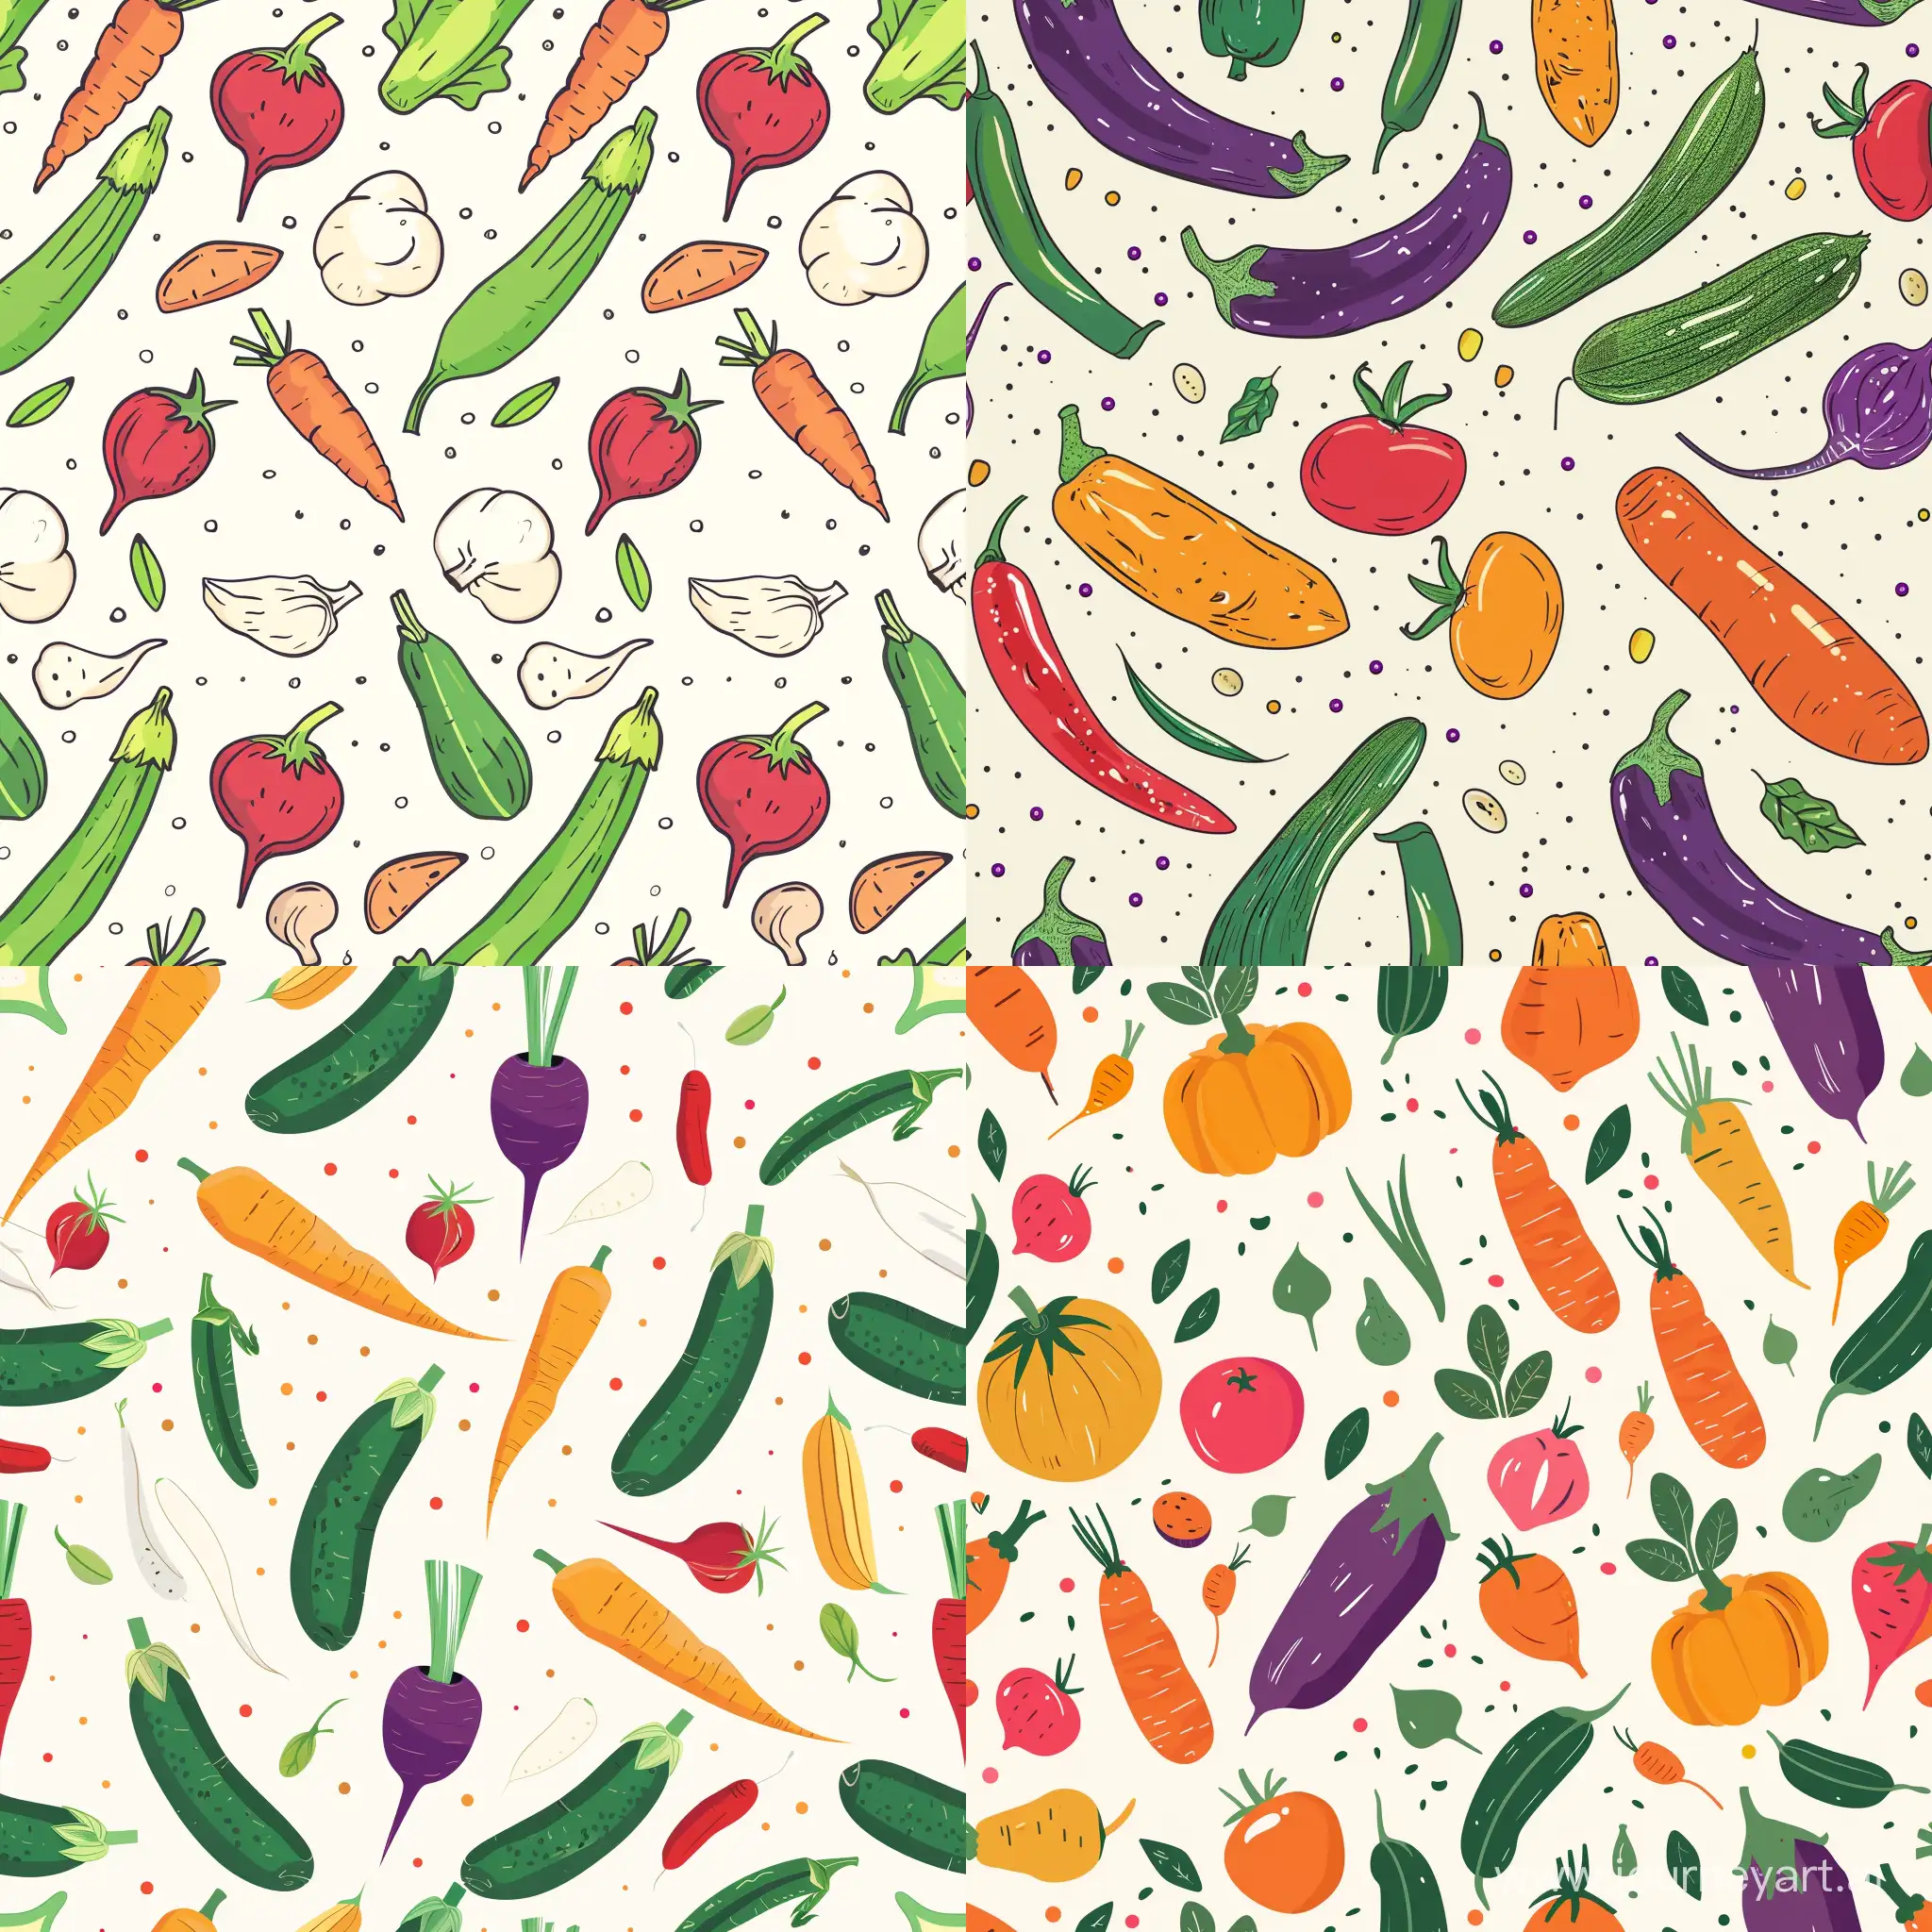 Vibrant-Vegetable-Pattern-Colorful-Array-of-Vegetables-in-a-Symmetrical-Design